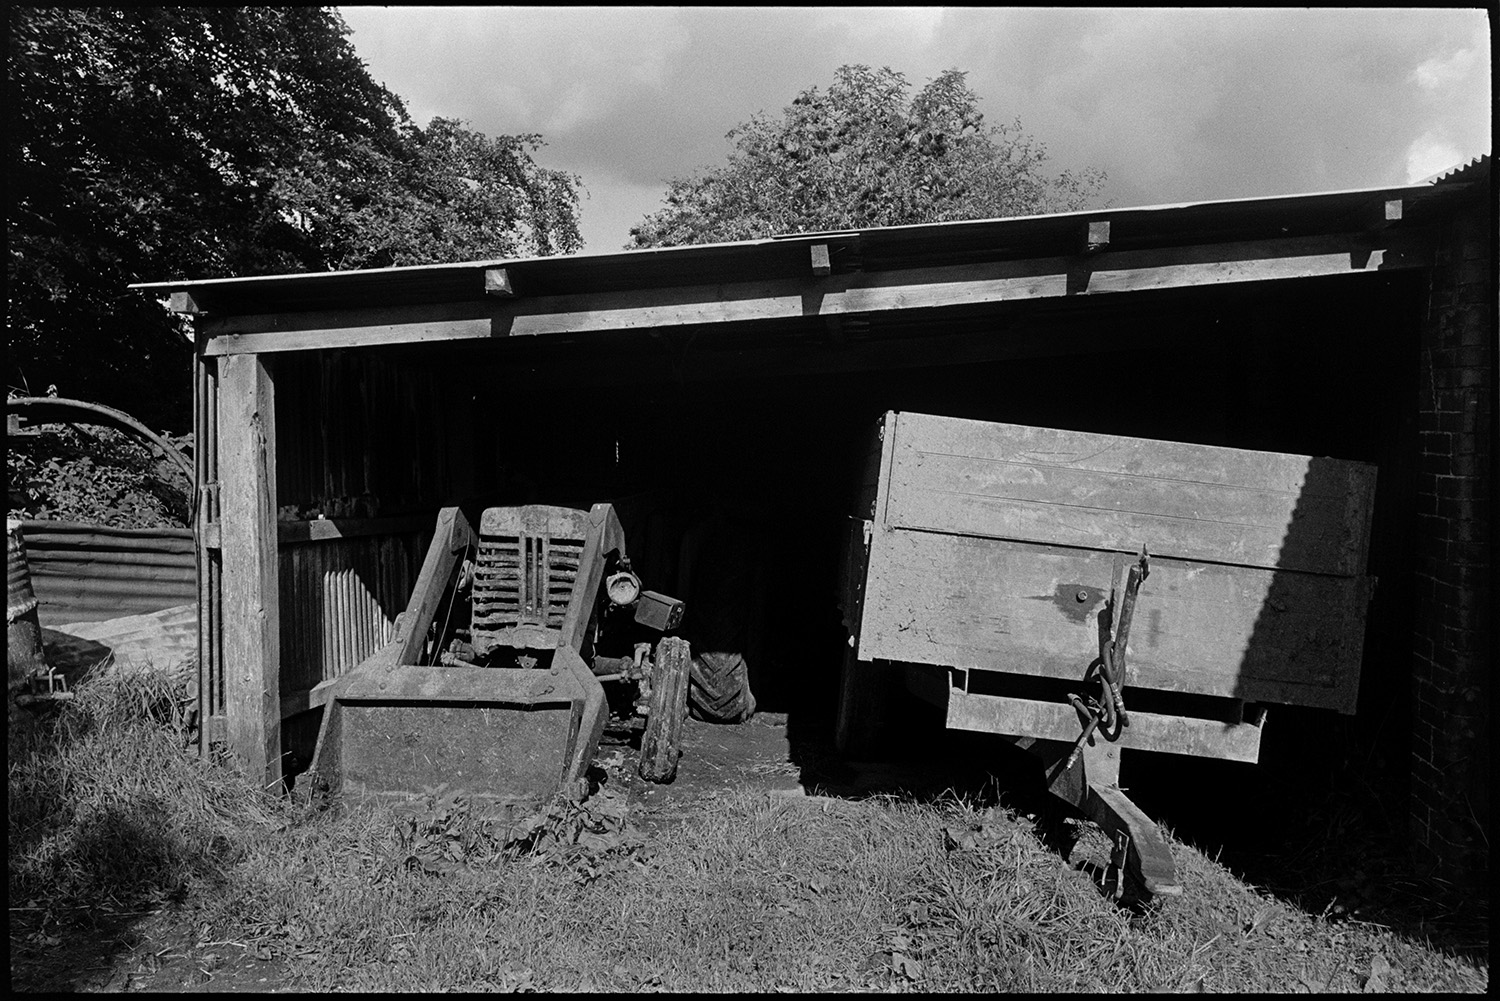 Dog barking in farm lane with parked harrow, old bulldozer. 
[An old tractor and wooden trailer parked in a shed at Spittle Farm, Chulmleigh.]